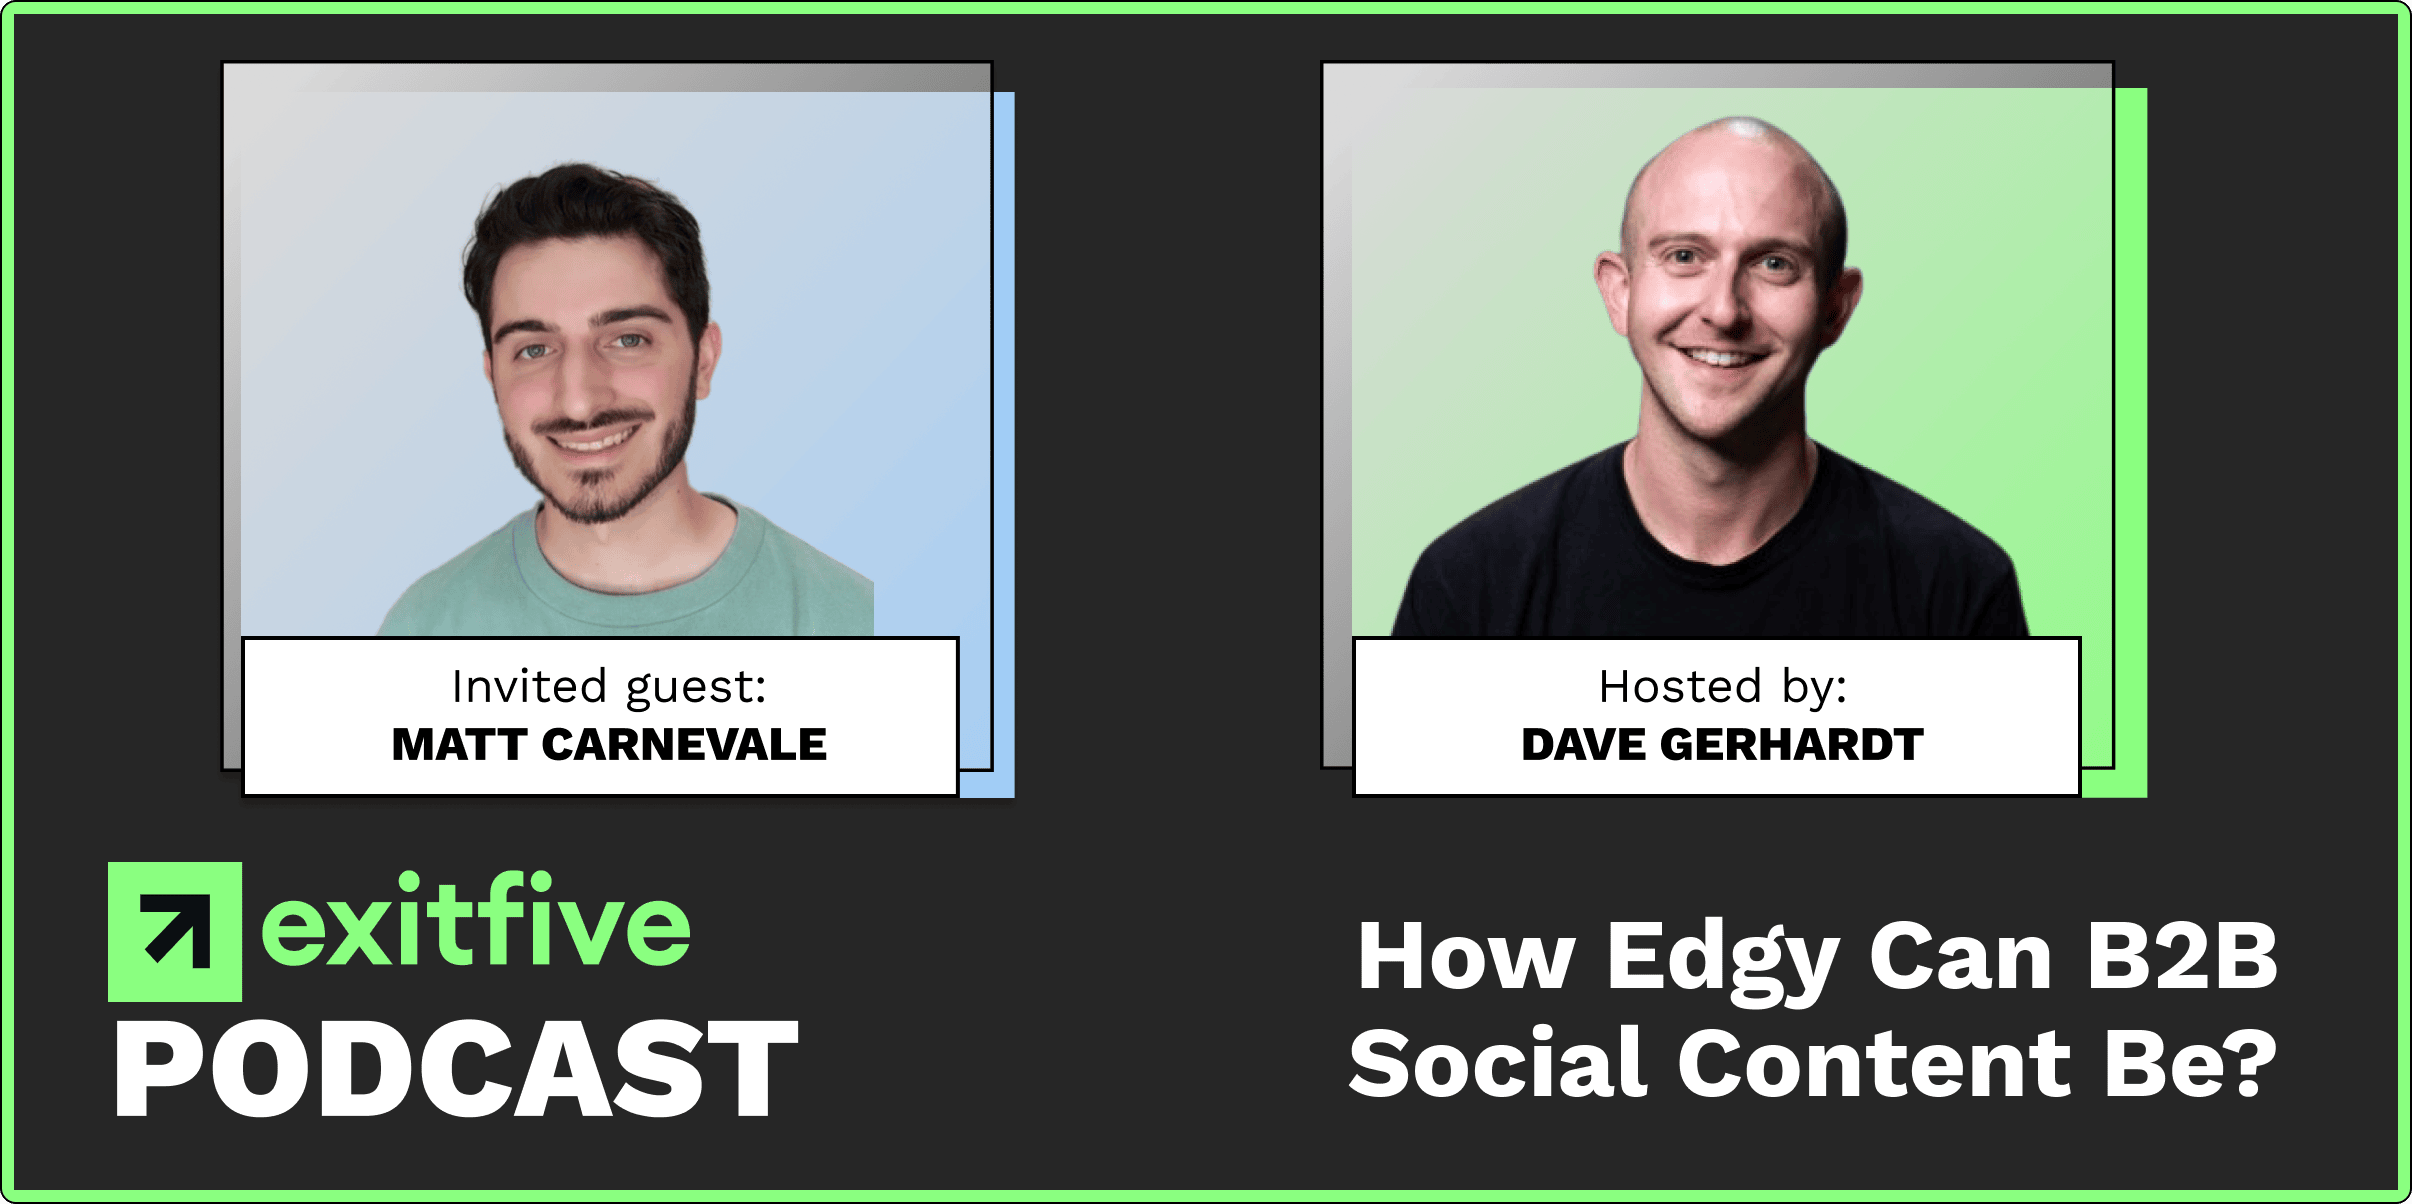 Inside exitfive | How Edgy Can B2B Social Content Be? Advice For First-Time Marketing Leaders and Product Launches